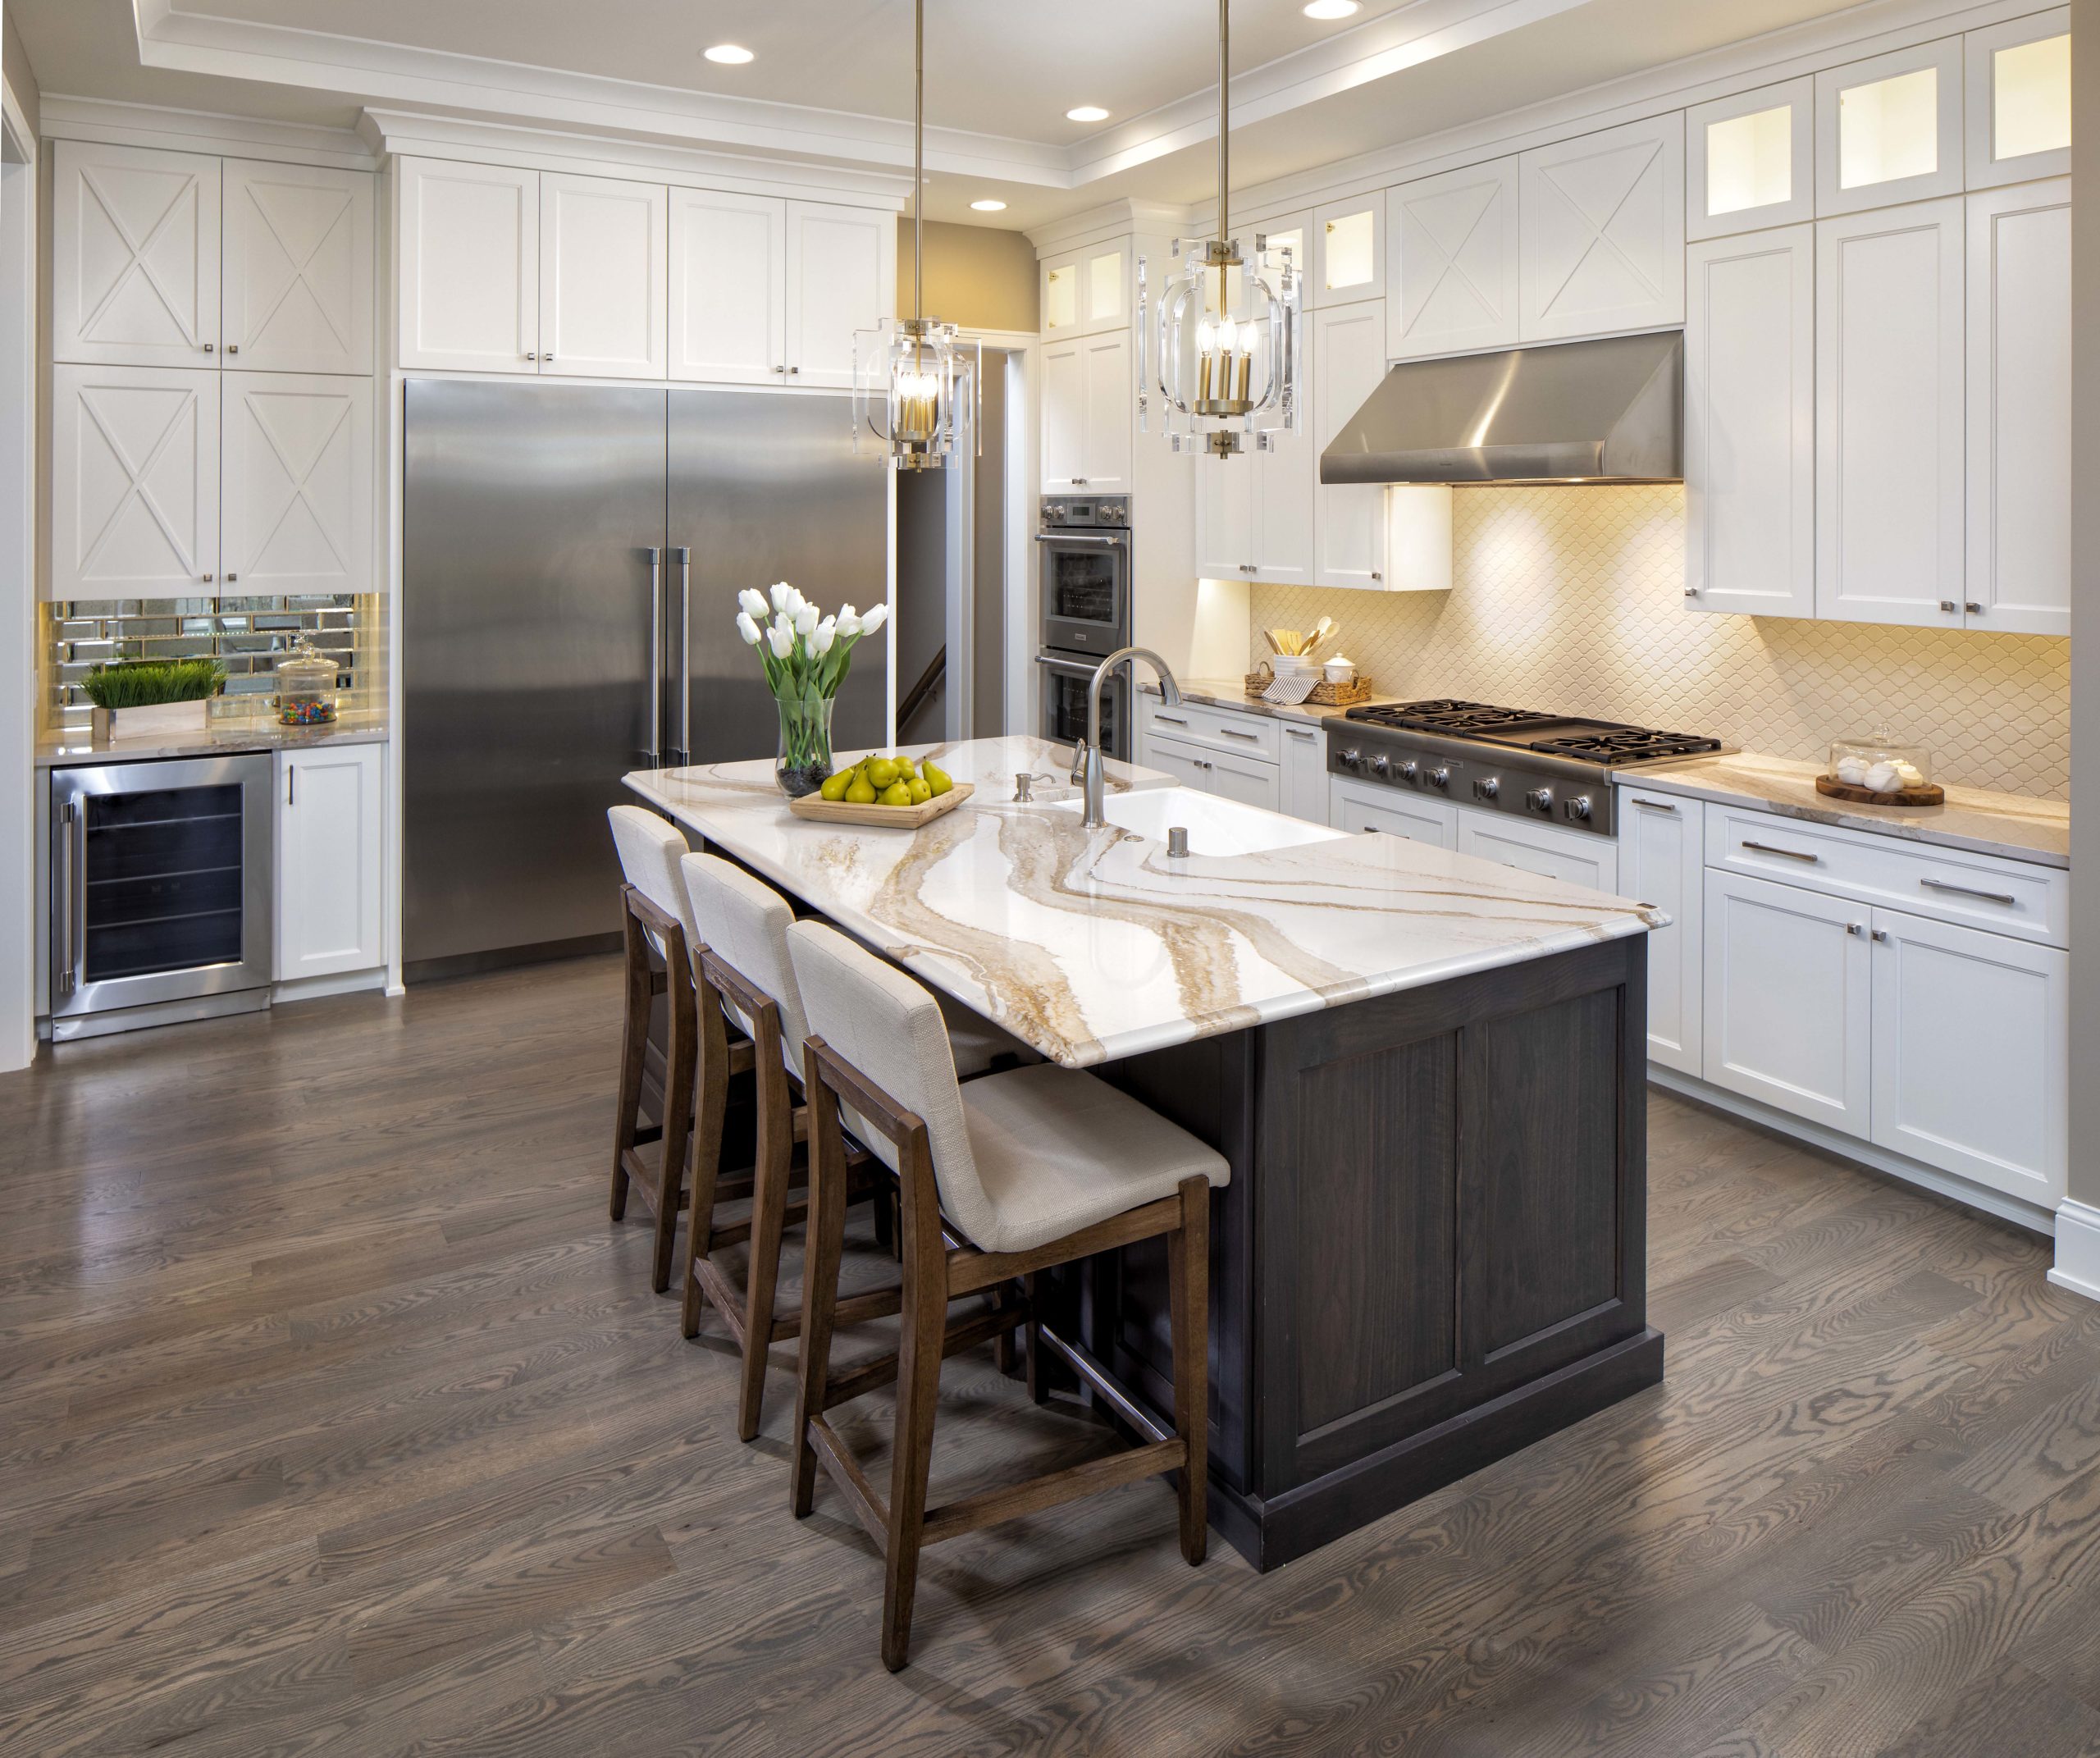 a kitchen with dark wood floors, white cabinets, a marbled countertop and three barstools